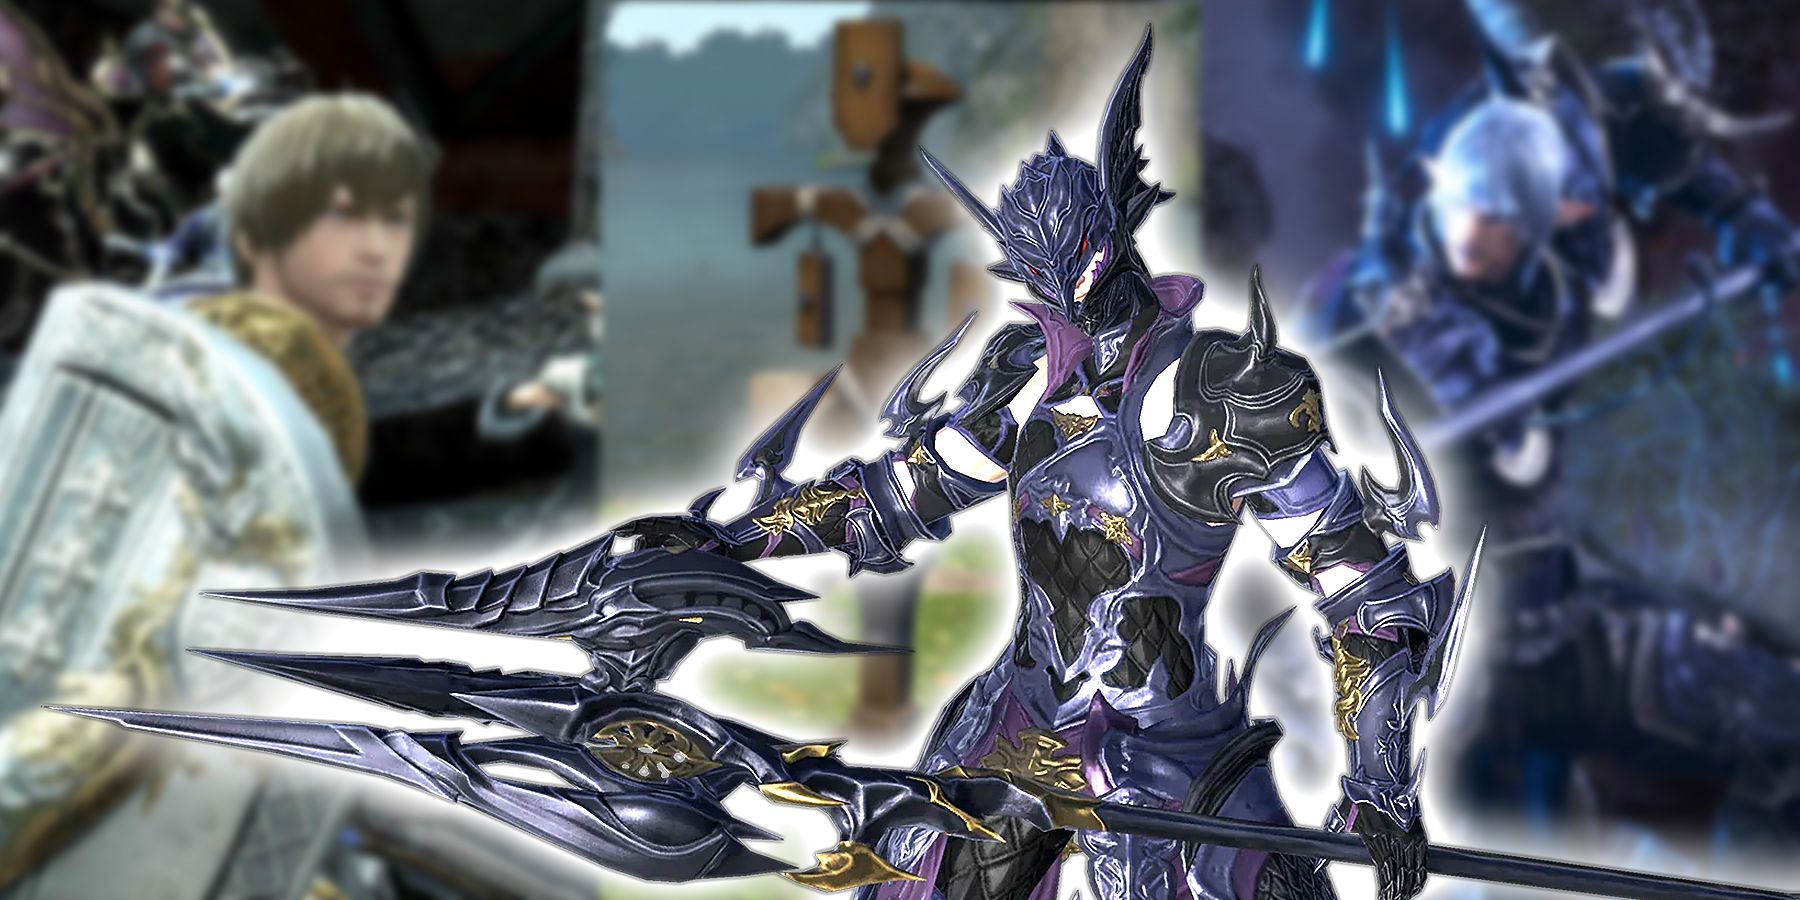 Final Fantasy XIV collage for tips for newbie DPS with Dragoon featured